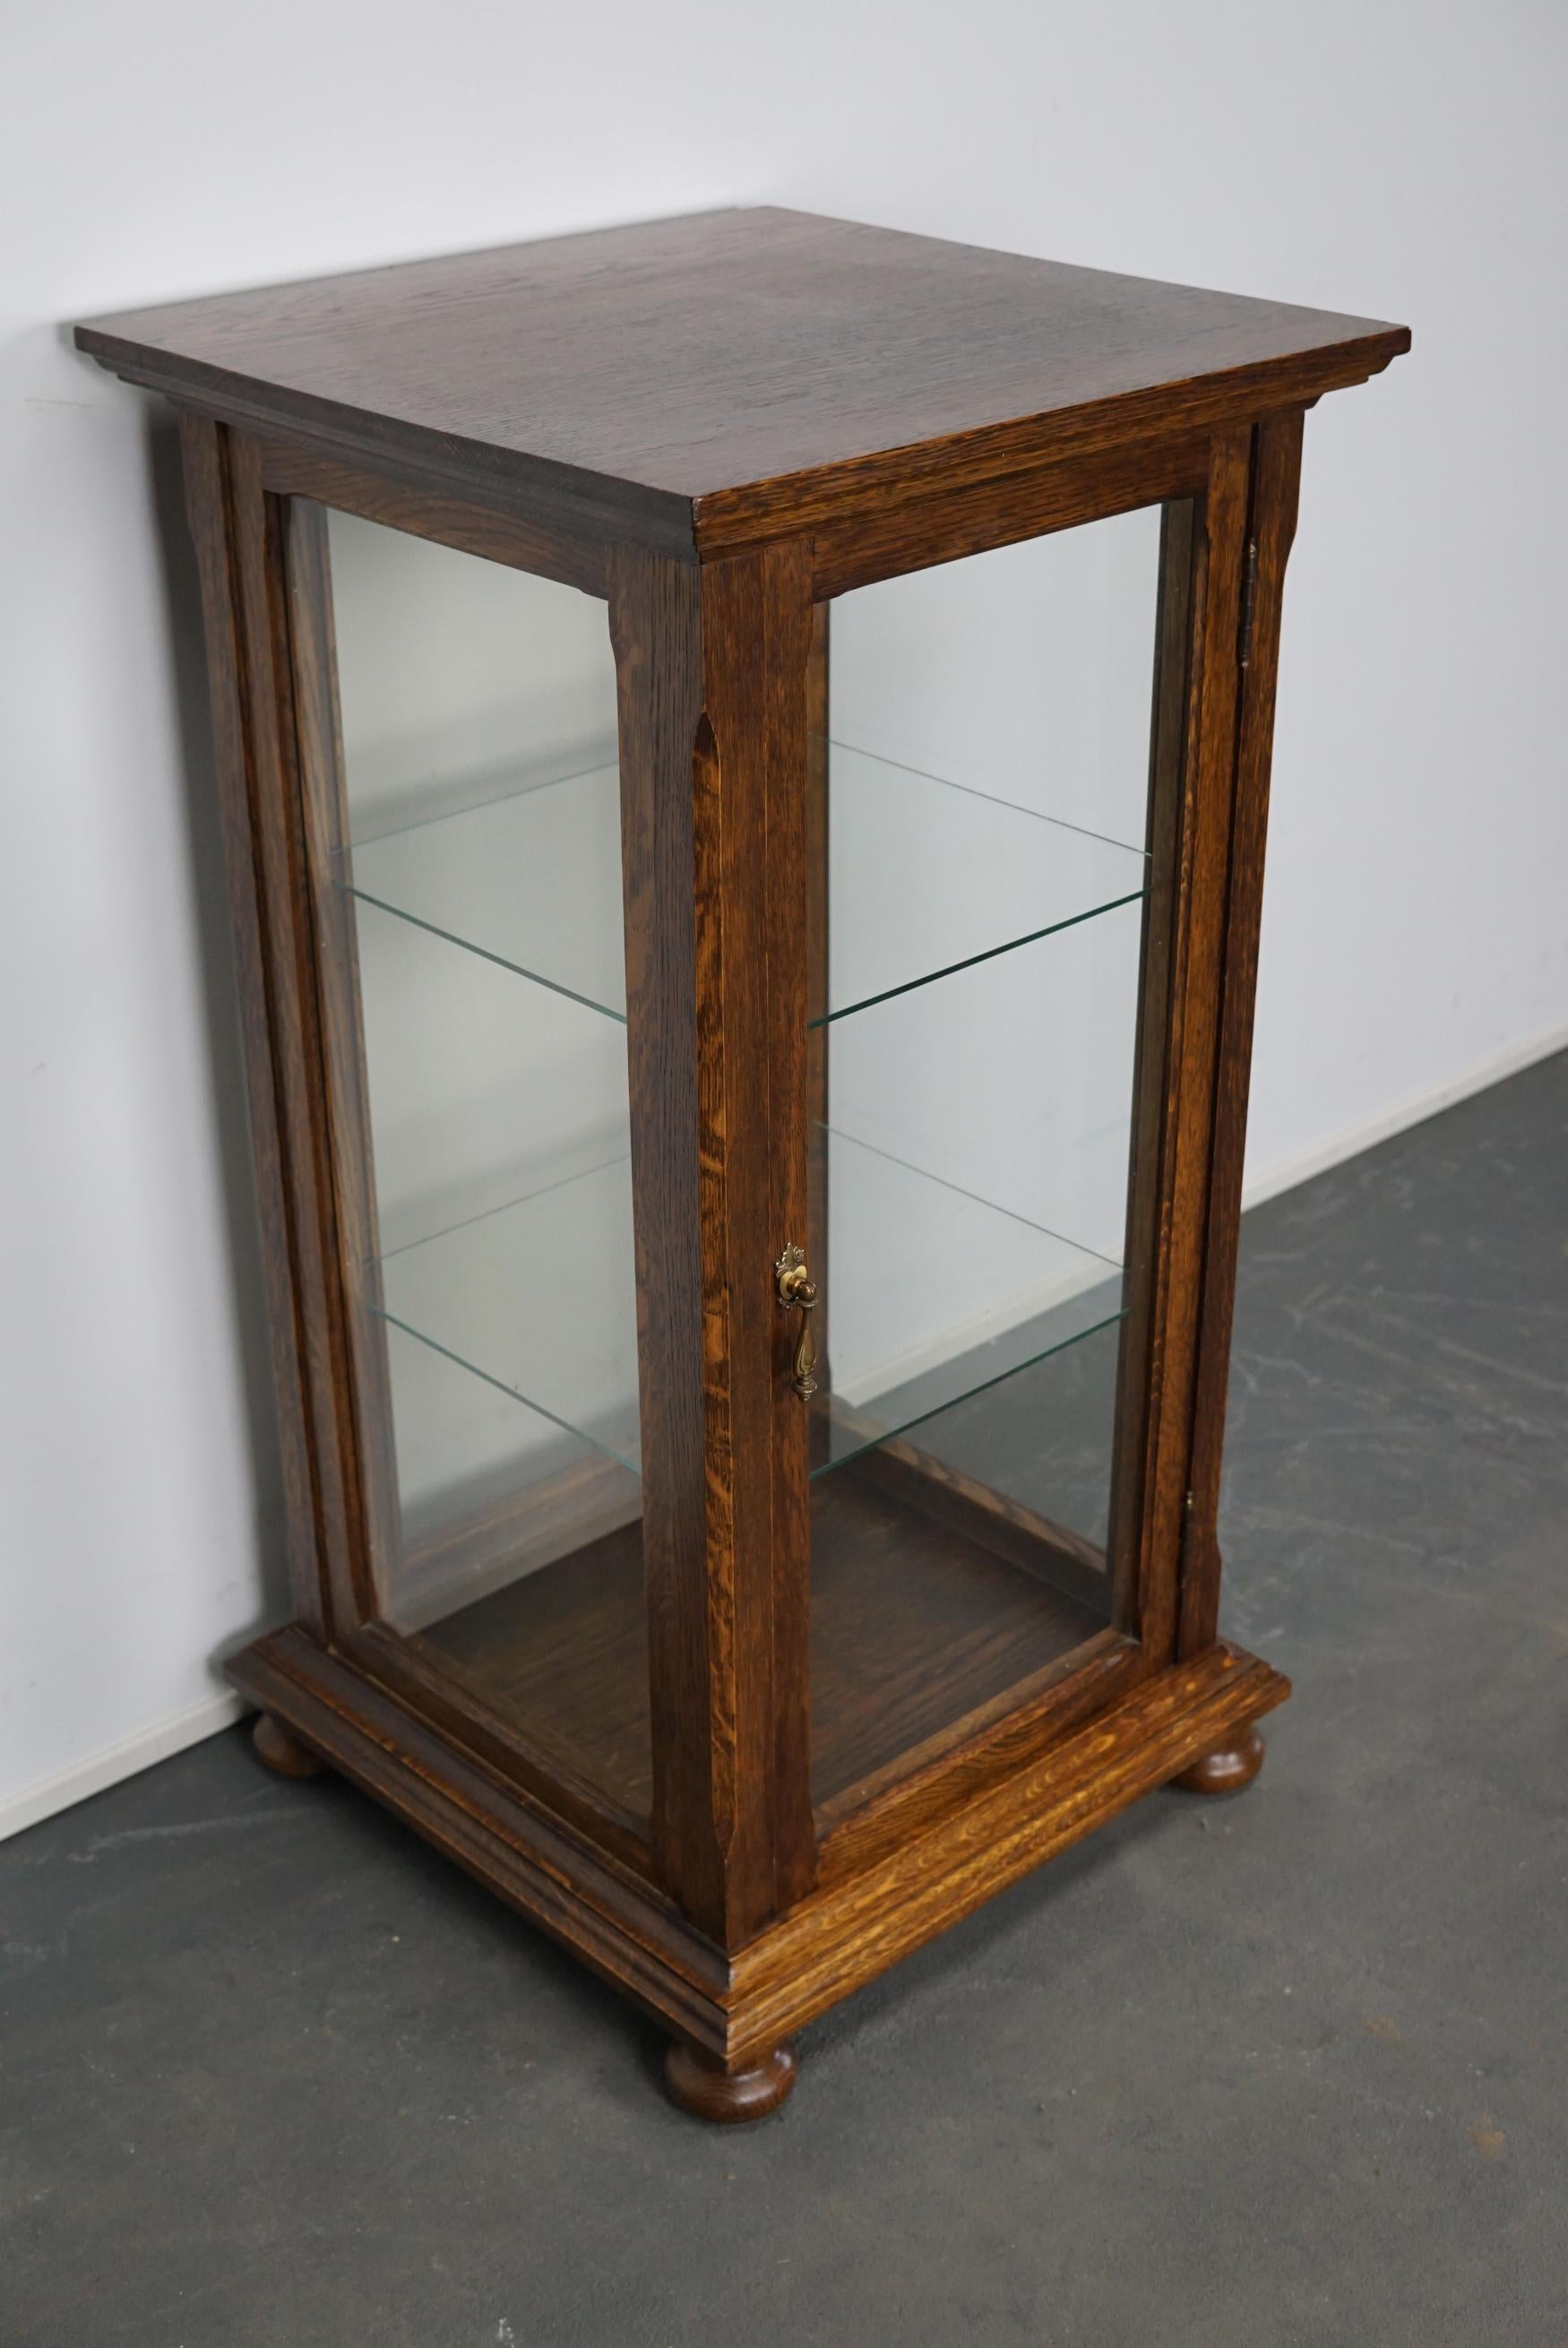 This oak shop vitrine was made in France, circa 1950s. It was used to display items in a shop.